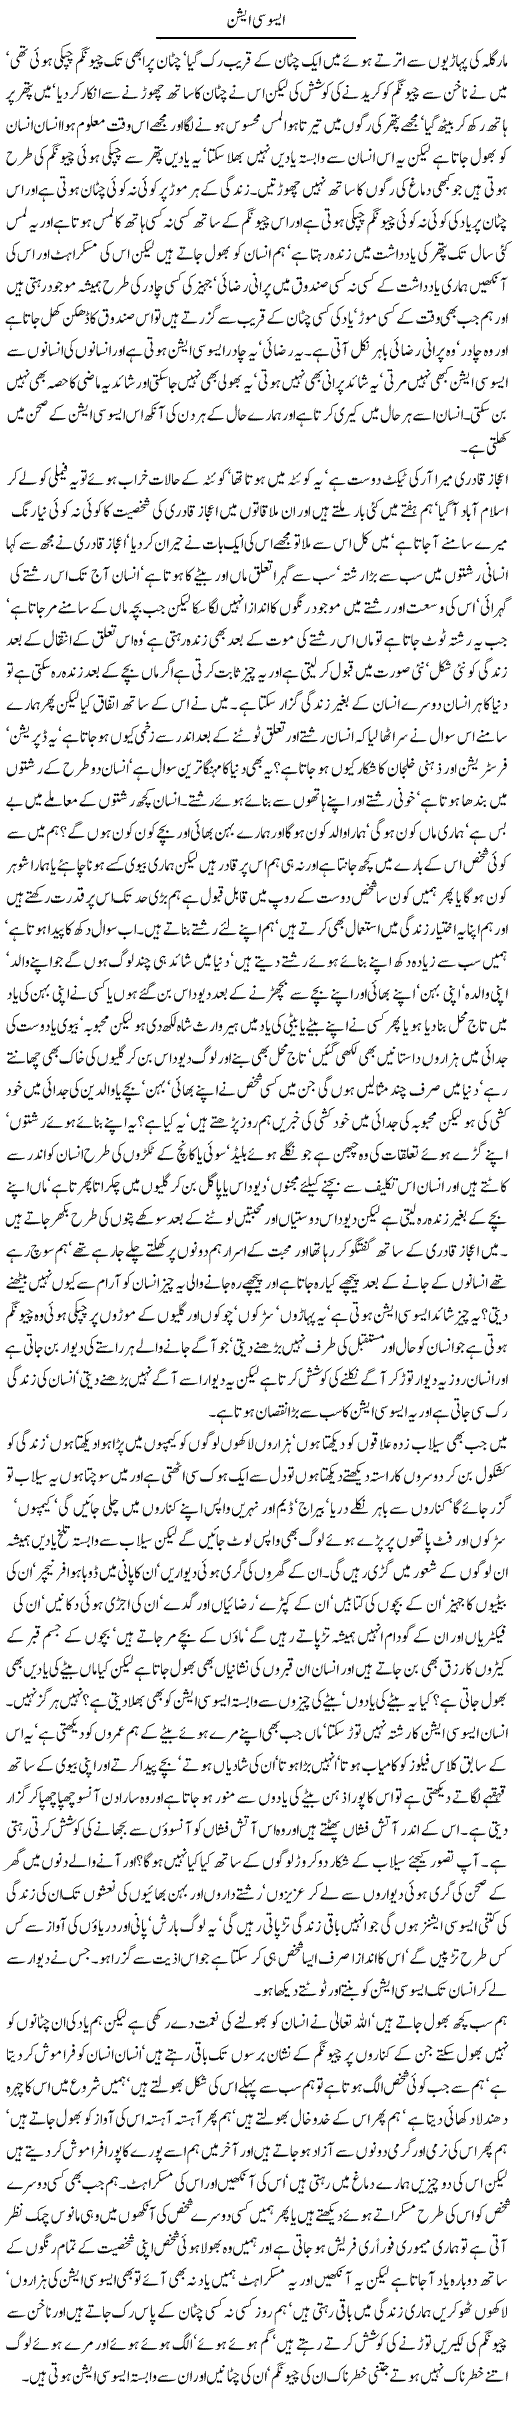 Association Express Column Javed Chaudhry 15 August 2010